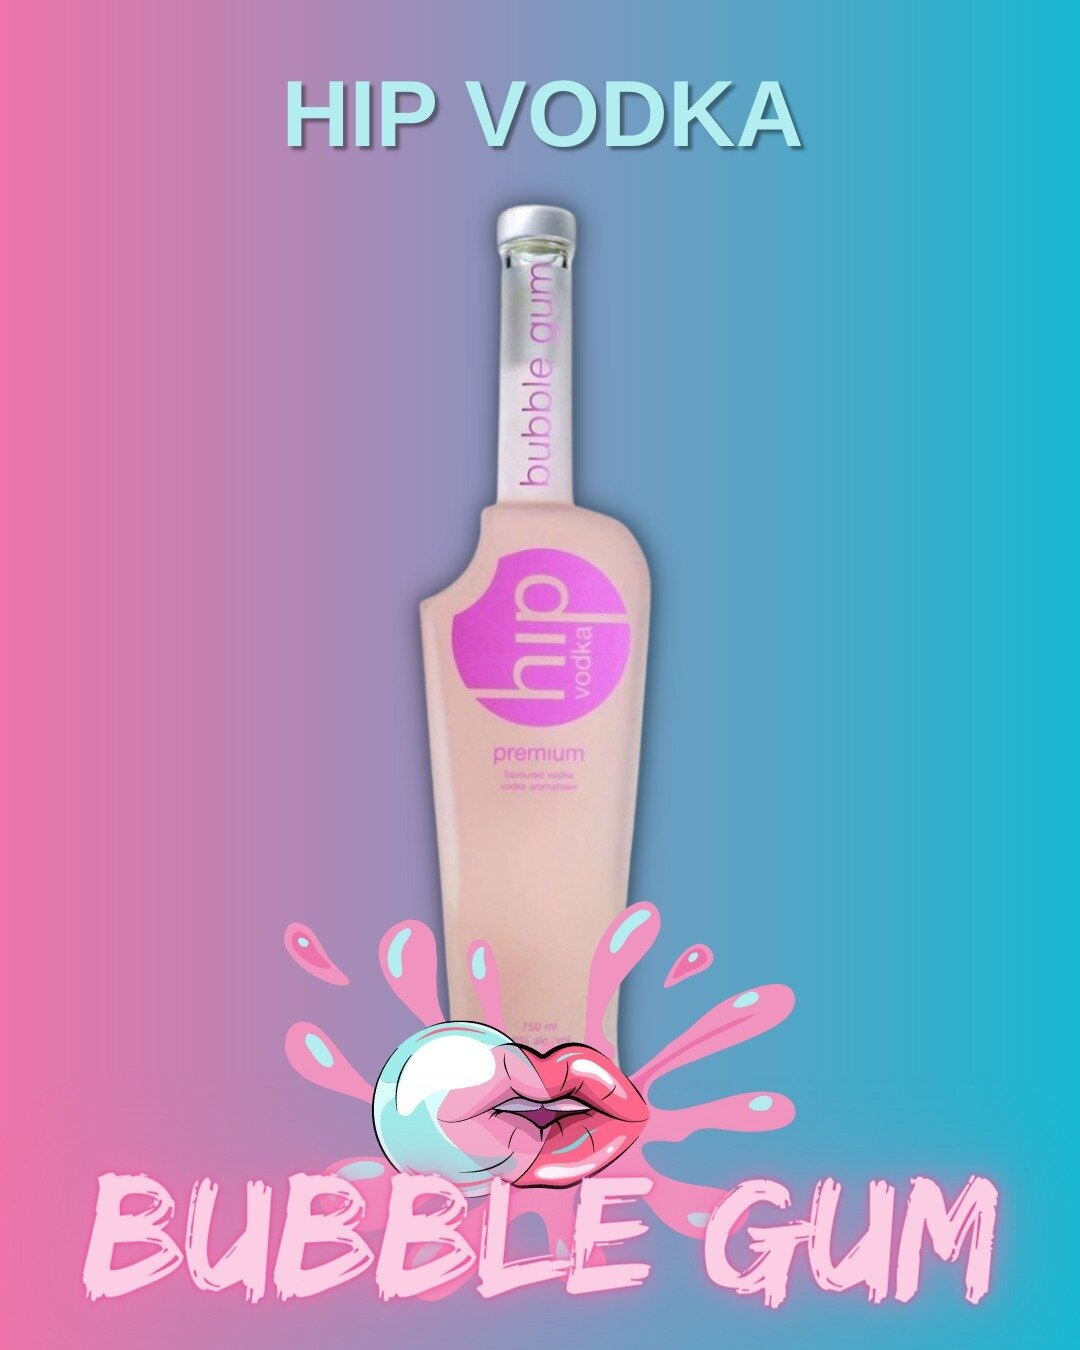 Bubble gum dreams come true! Sip on this playful concoction and let nostalgia take you back to carefree days. Who's ready for a taste of sweet memories? 🍬🍹 #BubbleGumBlast

#VodkaLovers #VodkaLife #VodkaMixology #VodkaGram #CocktailHour #DrinkUp 